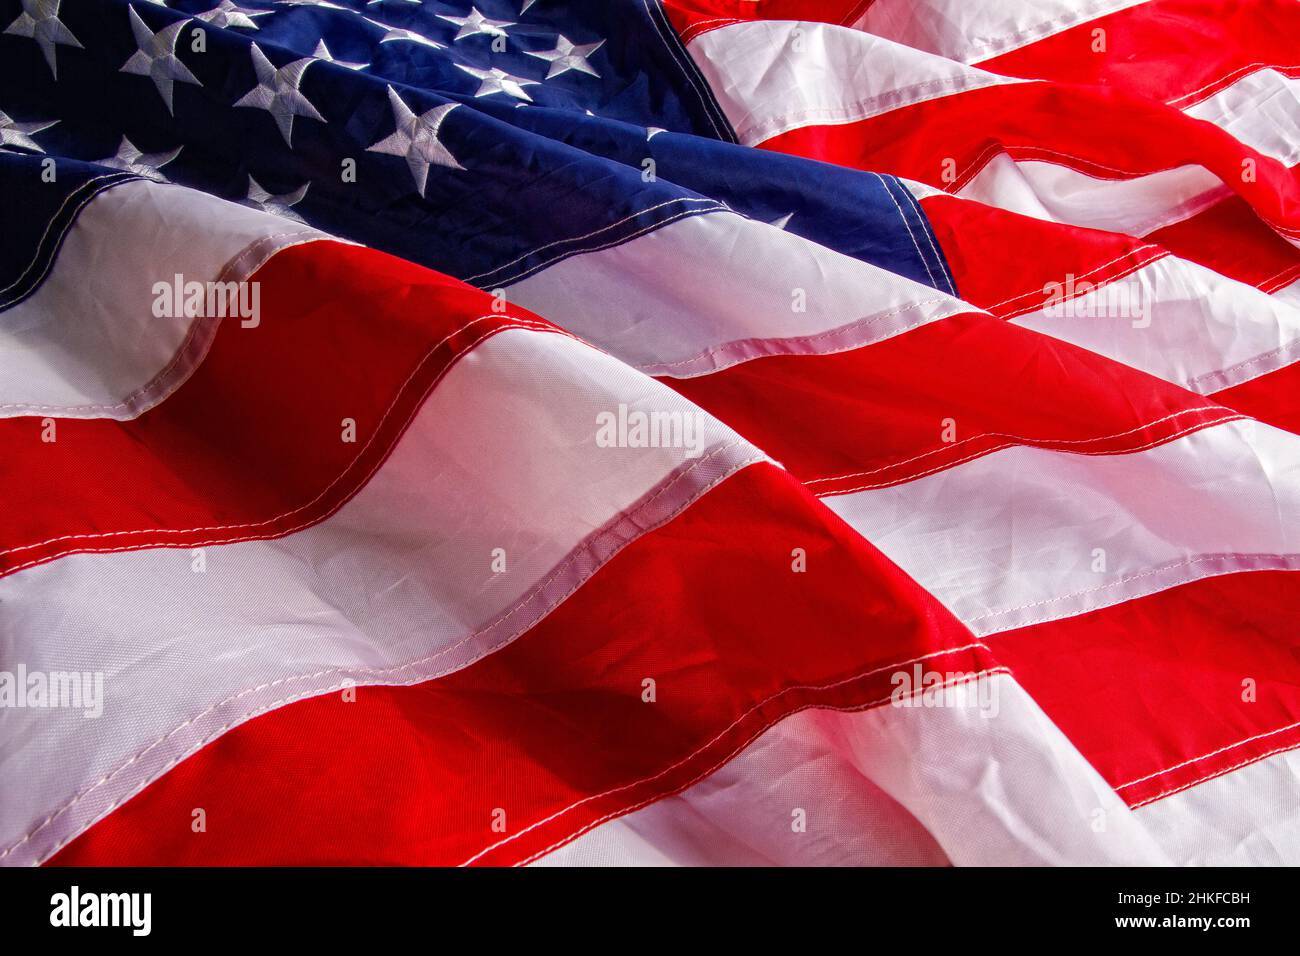 Beautiful star-striped flag waving the state symbol of the United States of America close-up Stock Photo